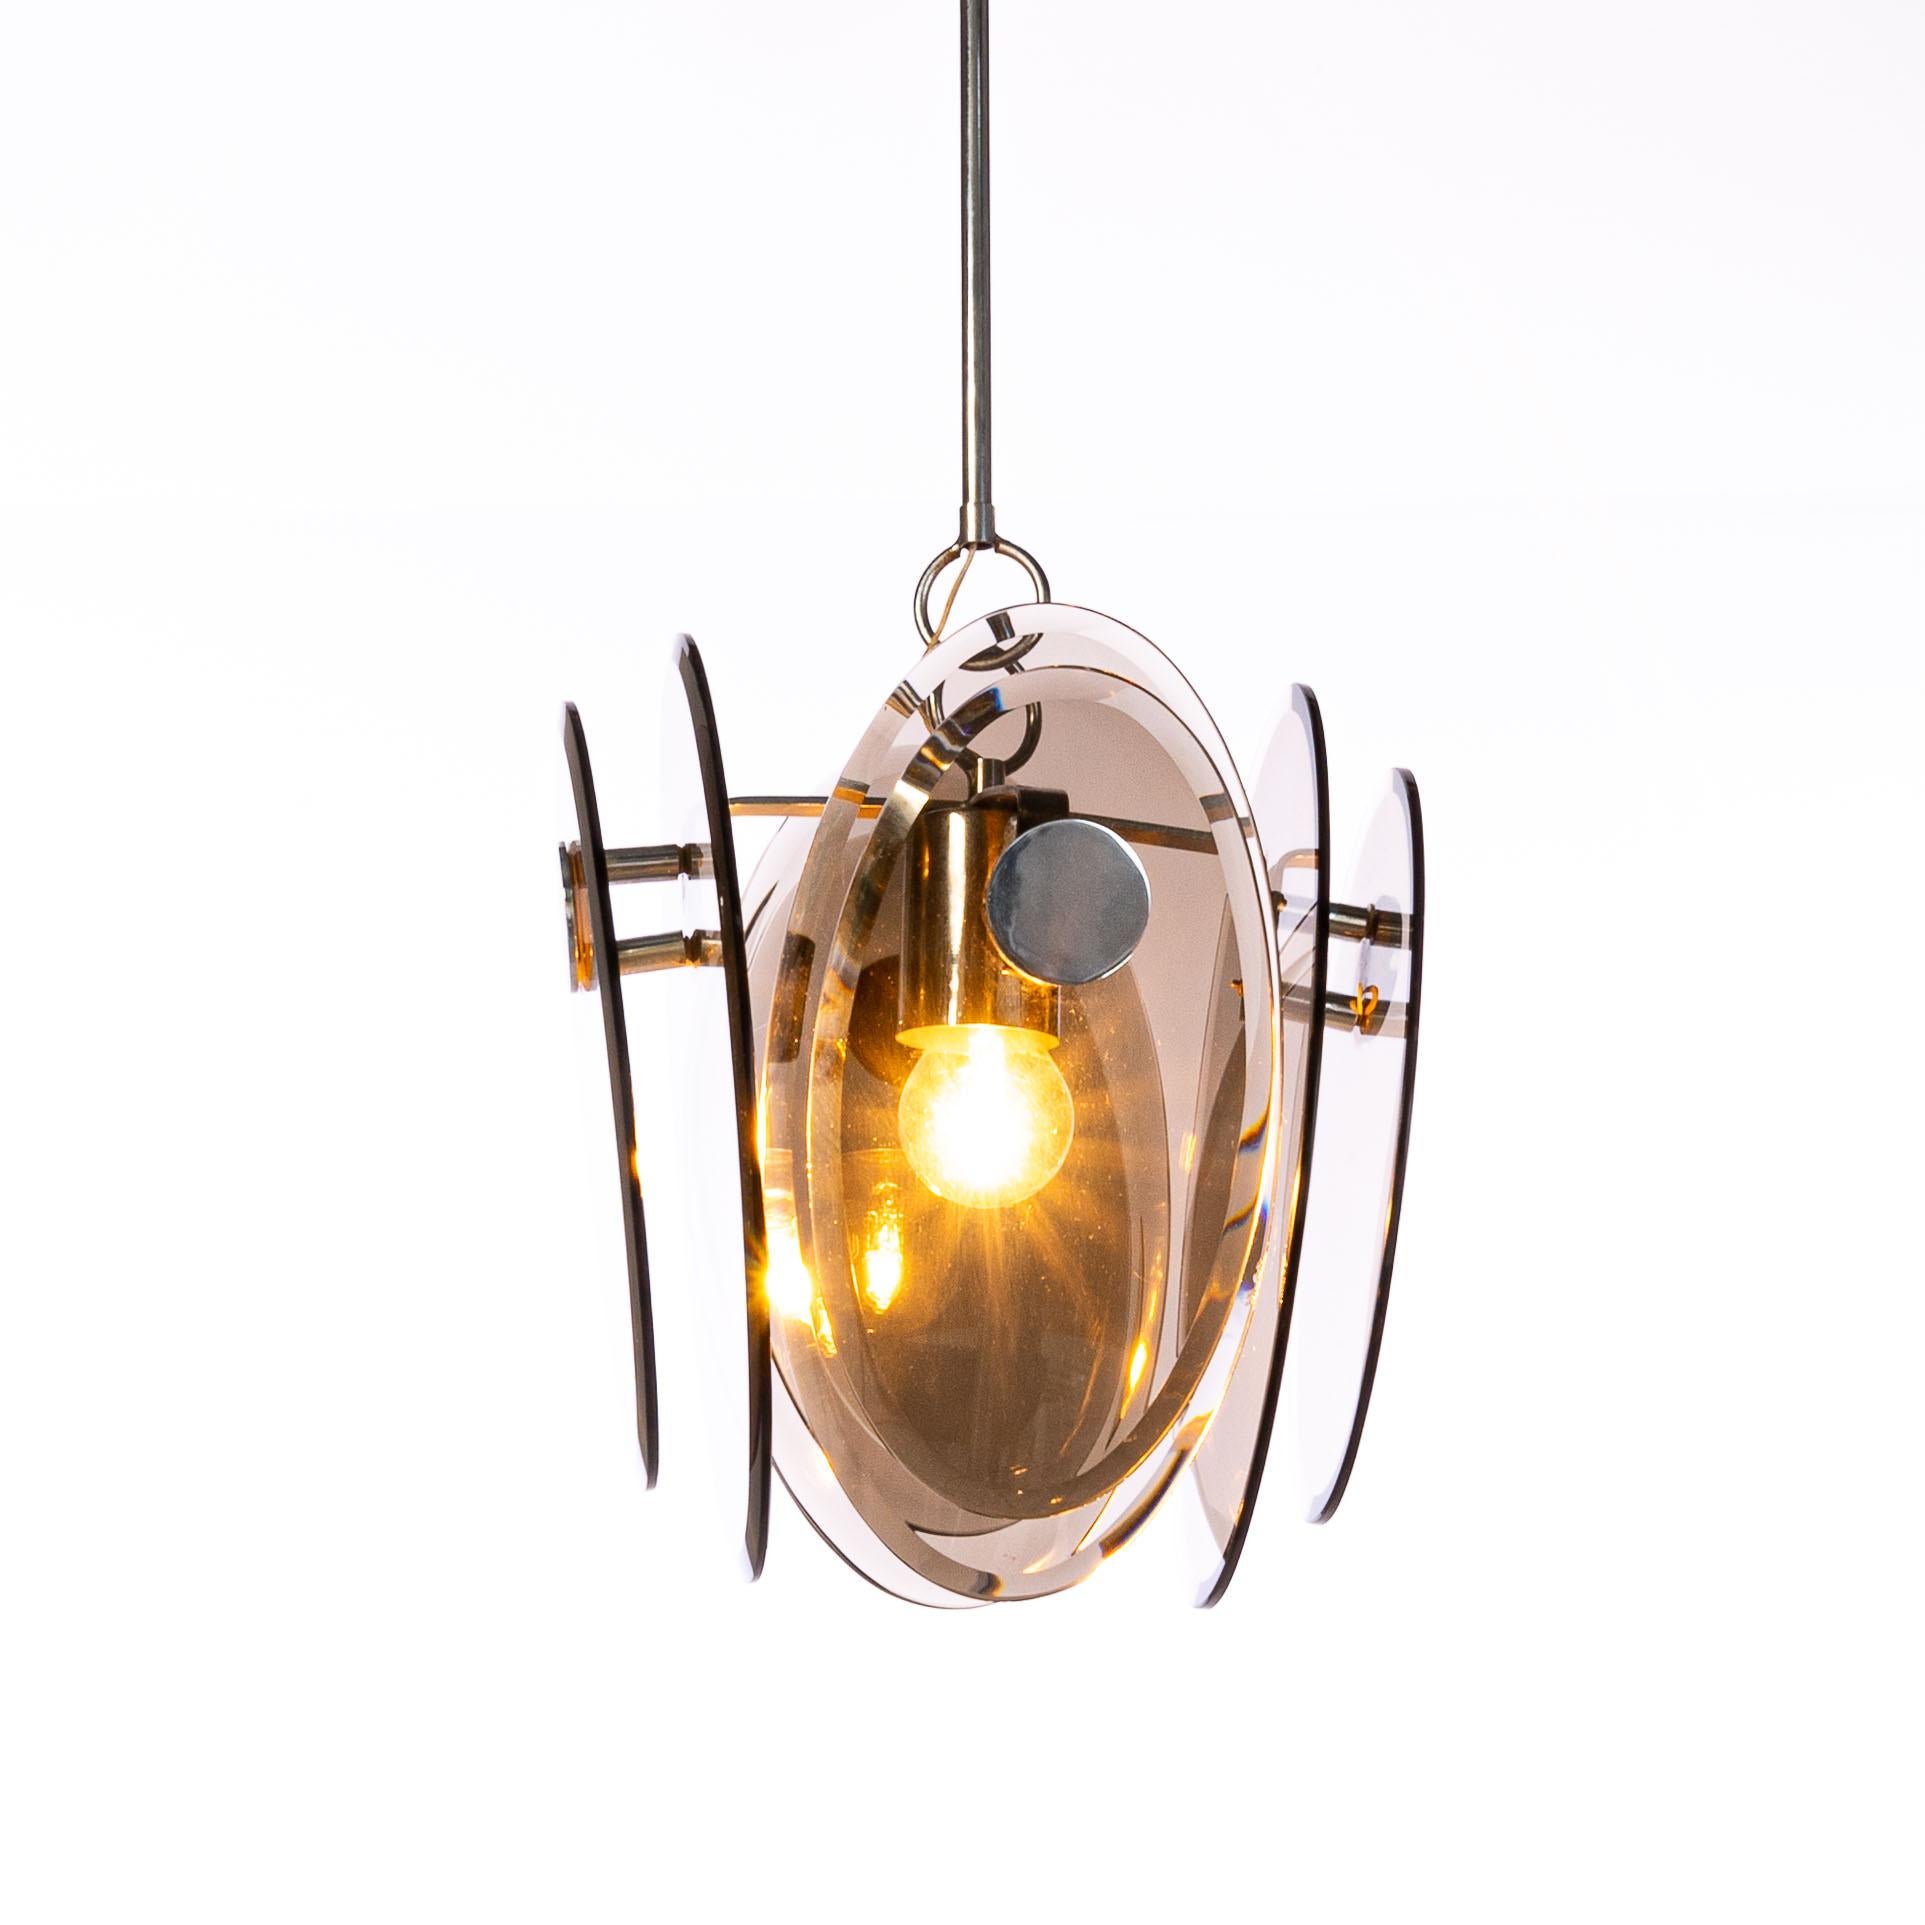 1970's Chrome & Glass Pendant Attributed to Veca In Good Condition For Sale In Schoorl, NL